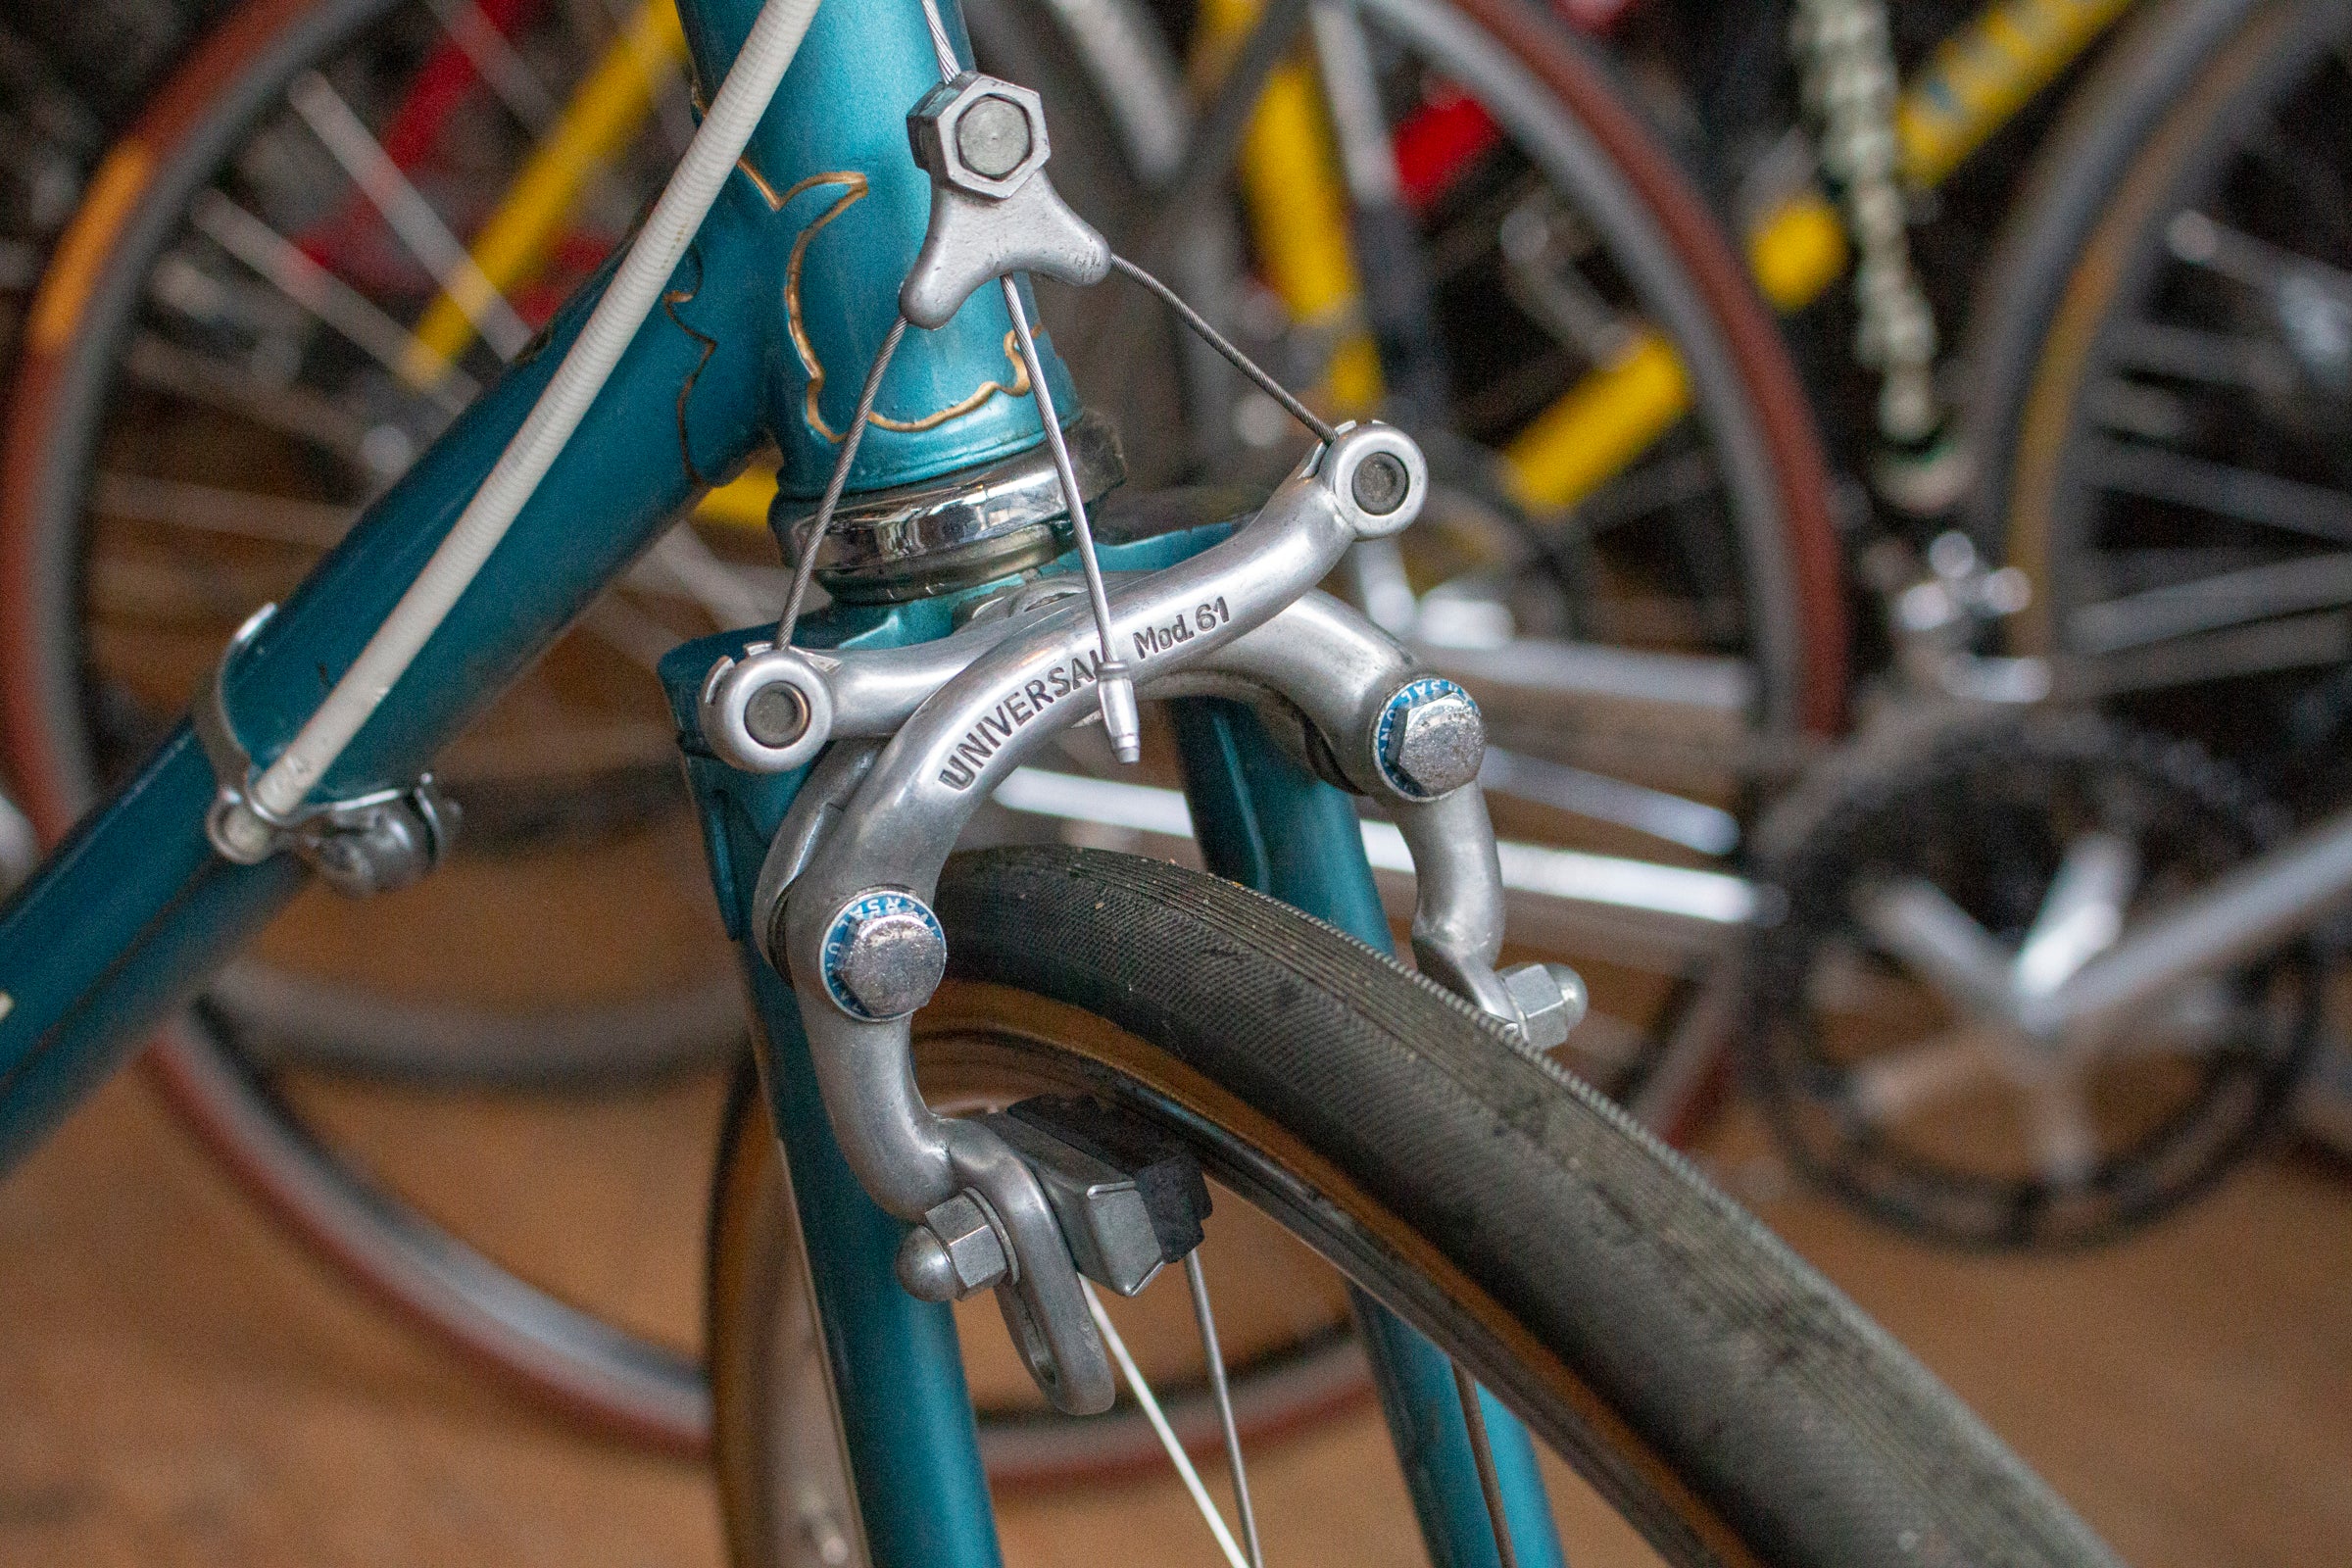 How to get the right brakes - Centre Pull brake - Pedal Pedlar Classic & Vintage Cycling